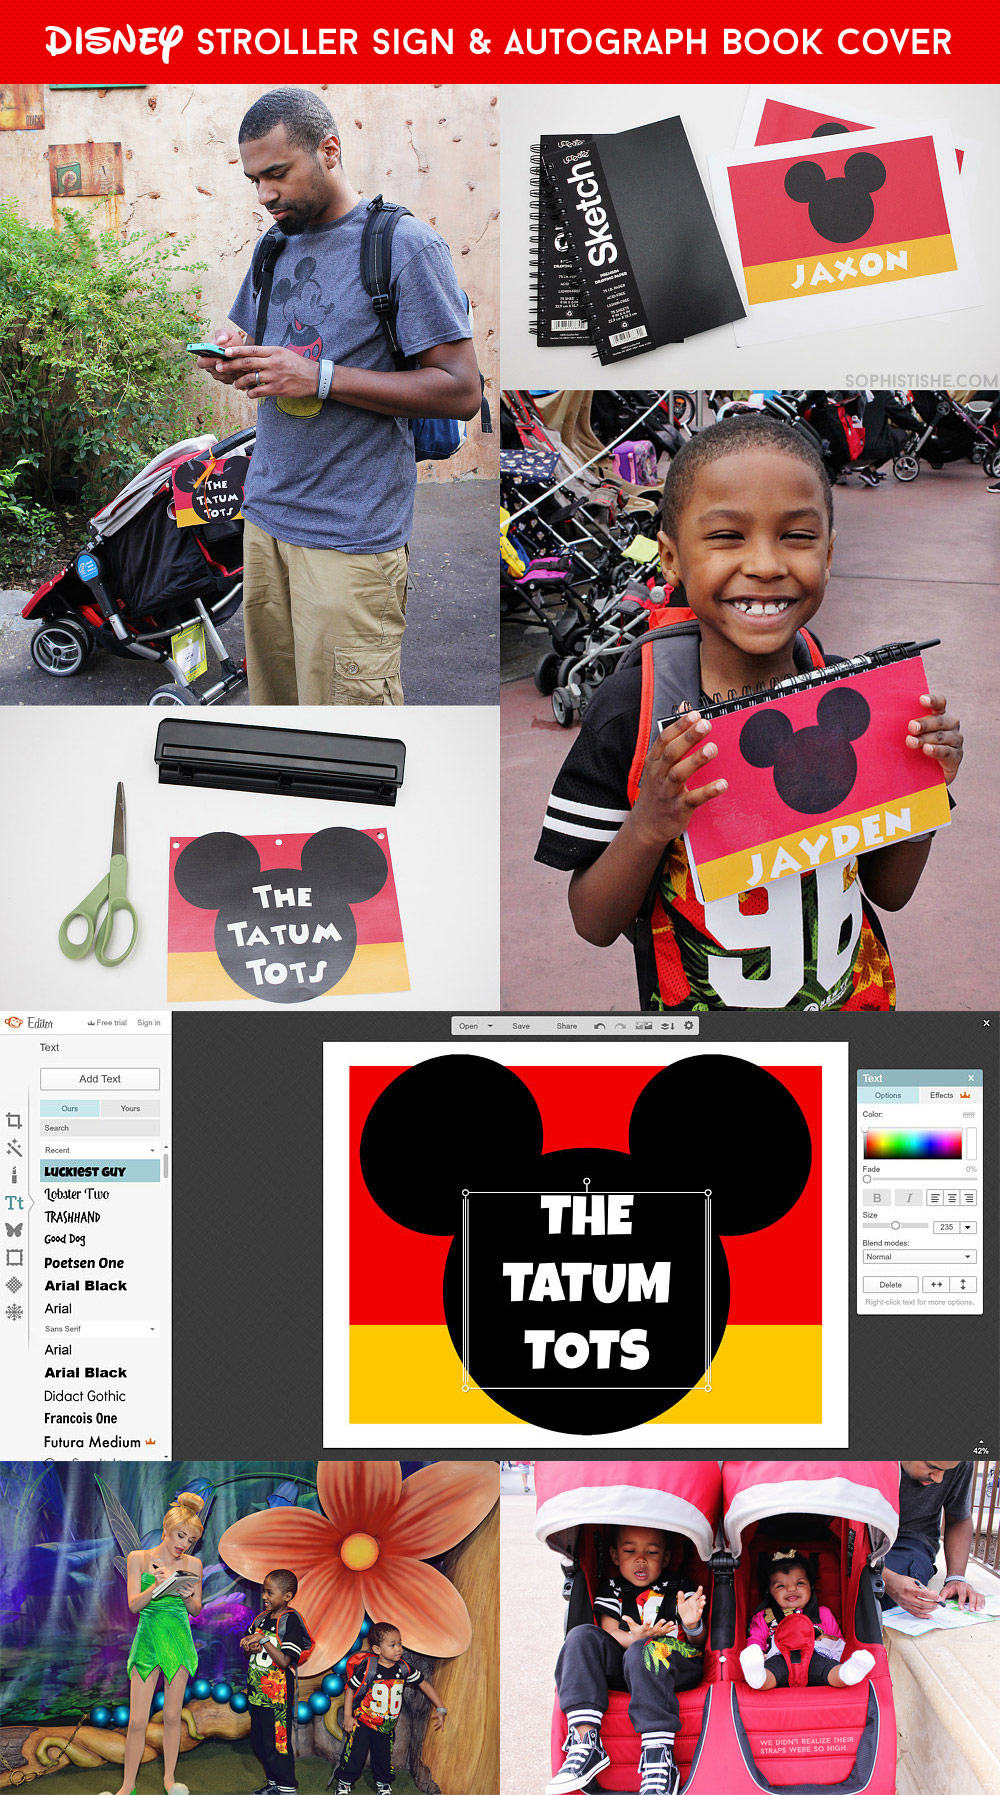 DIY Disney Autograph Book & Stroller Sign - stand out on your Disney vacation!